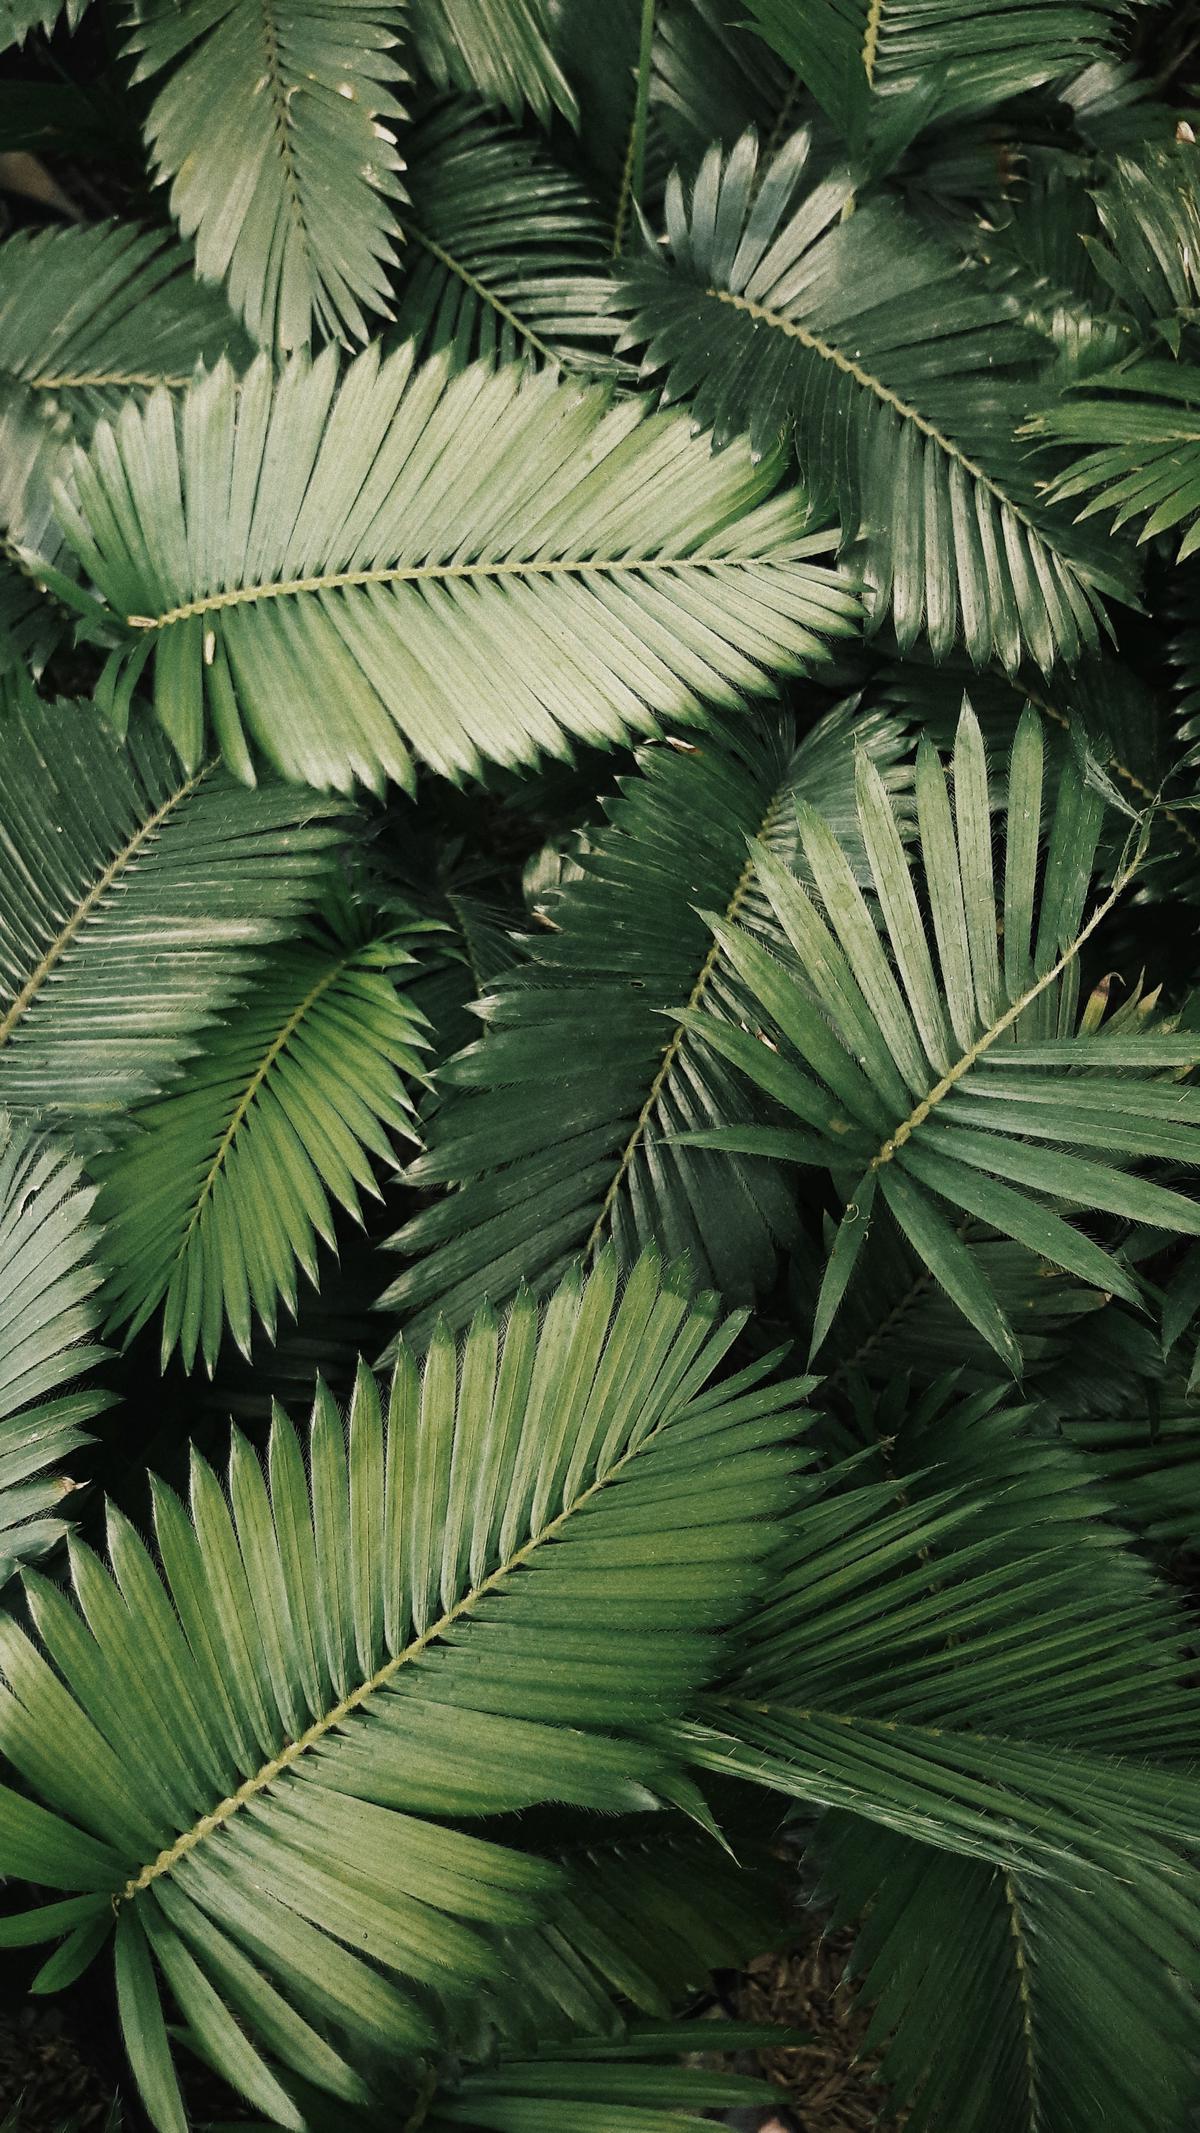 An image of a healthy indoor palm surrounded by vibrant green leaves.